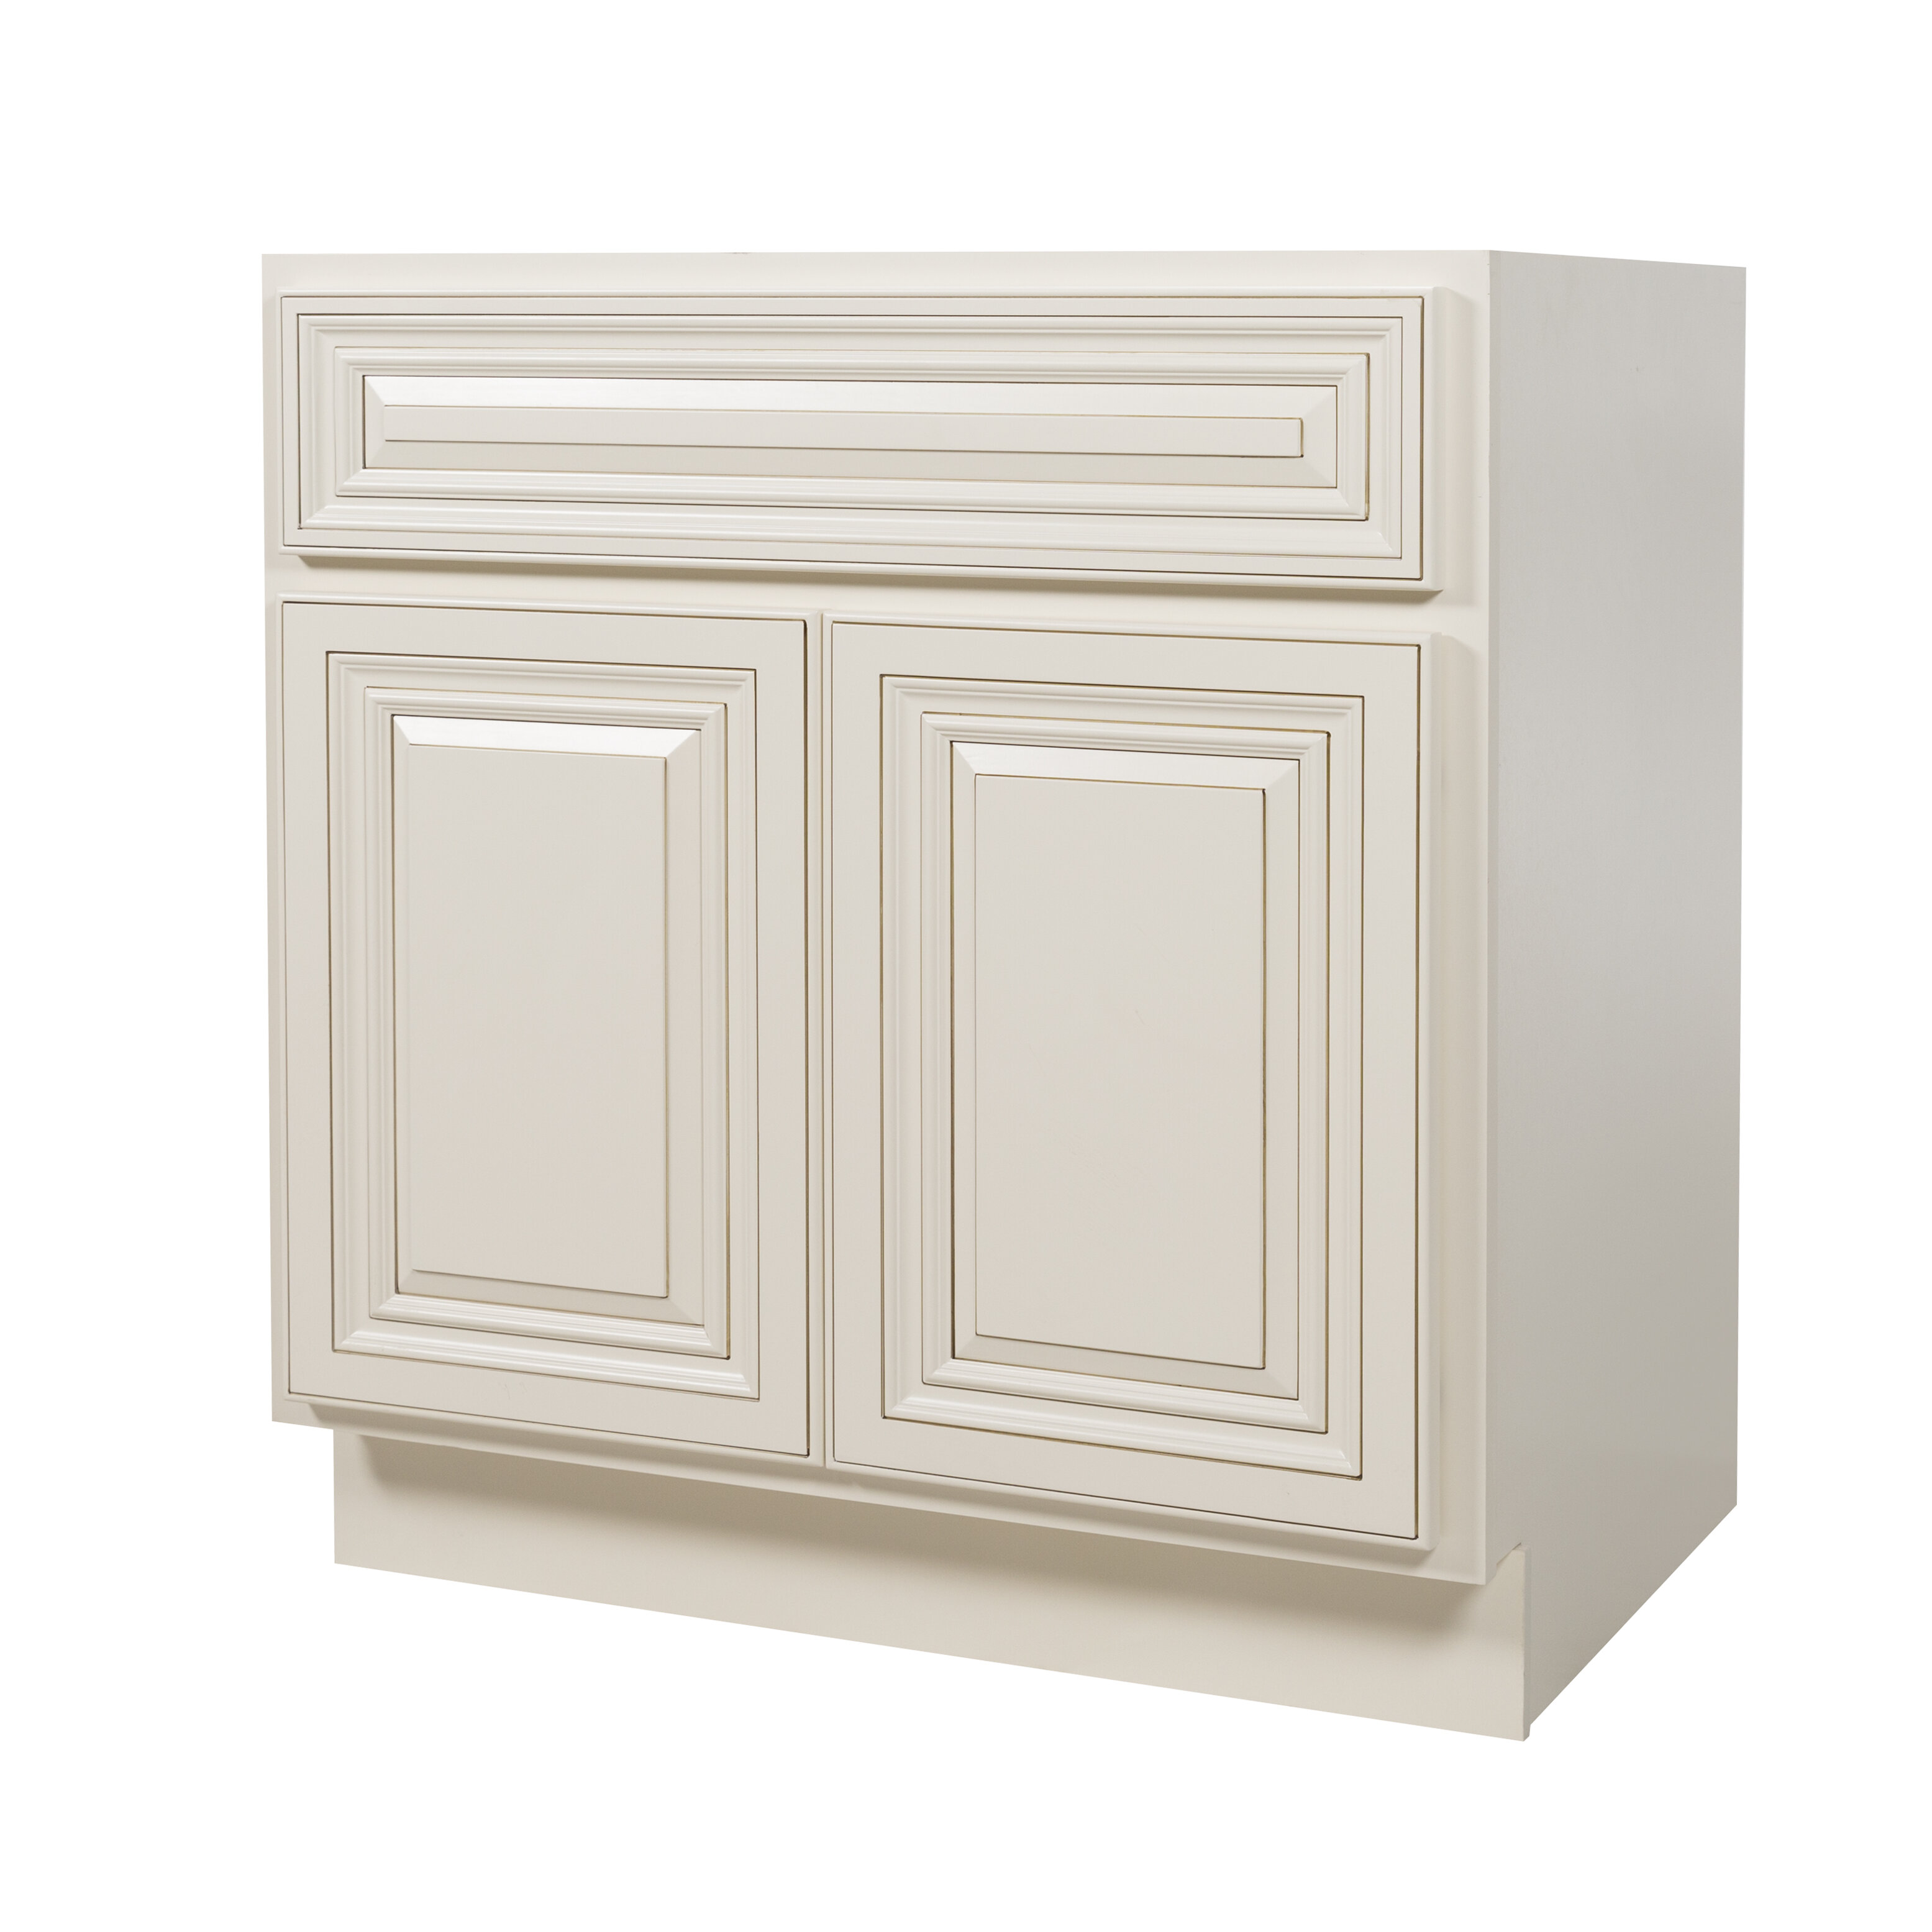 Nelsoncabinetry Chateau 30 Single Bathroom Vanity Base Only Wayfair